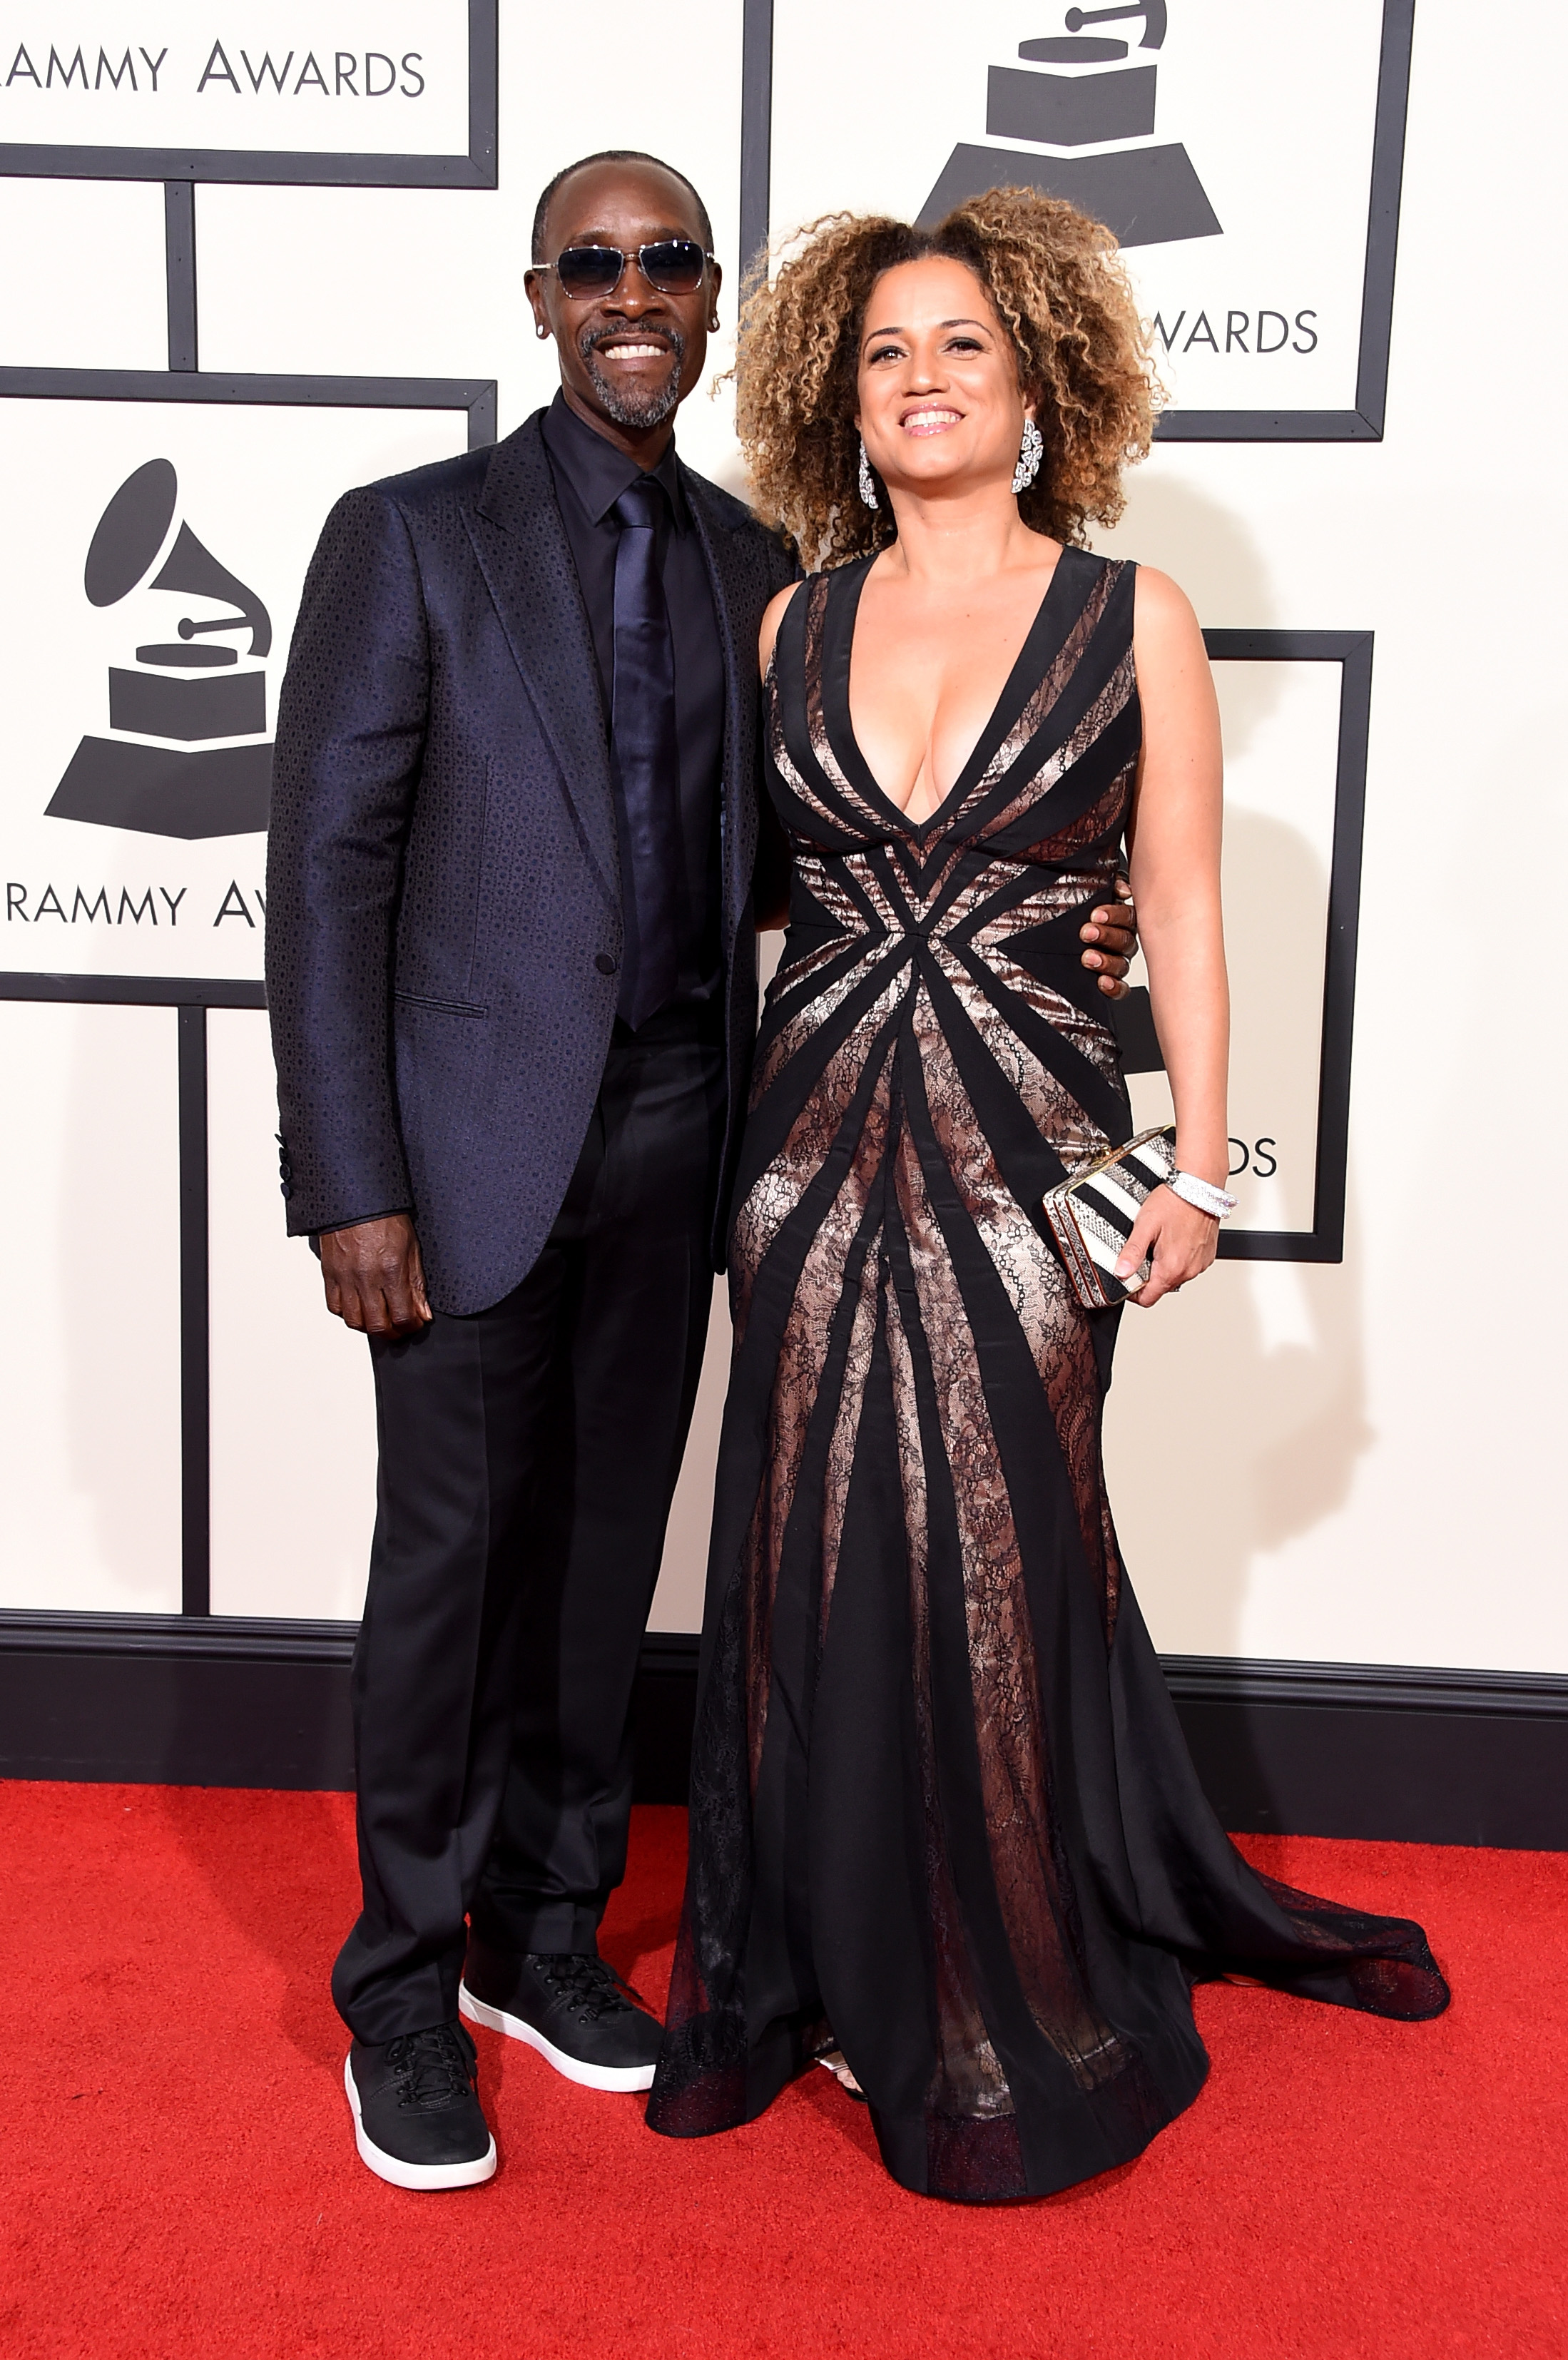 Don Cheadle, left, and Bridgid Coulter, right, attend the 58th GRAMMY Awards at Staples Center on Feb. 15, 2016 in Los Angeles.